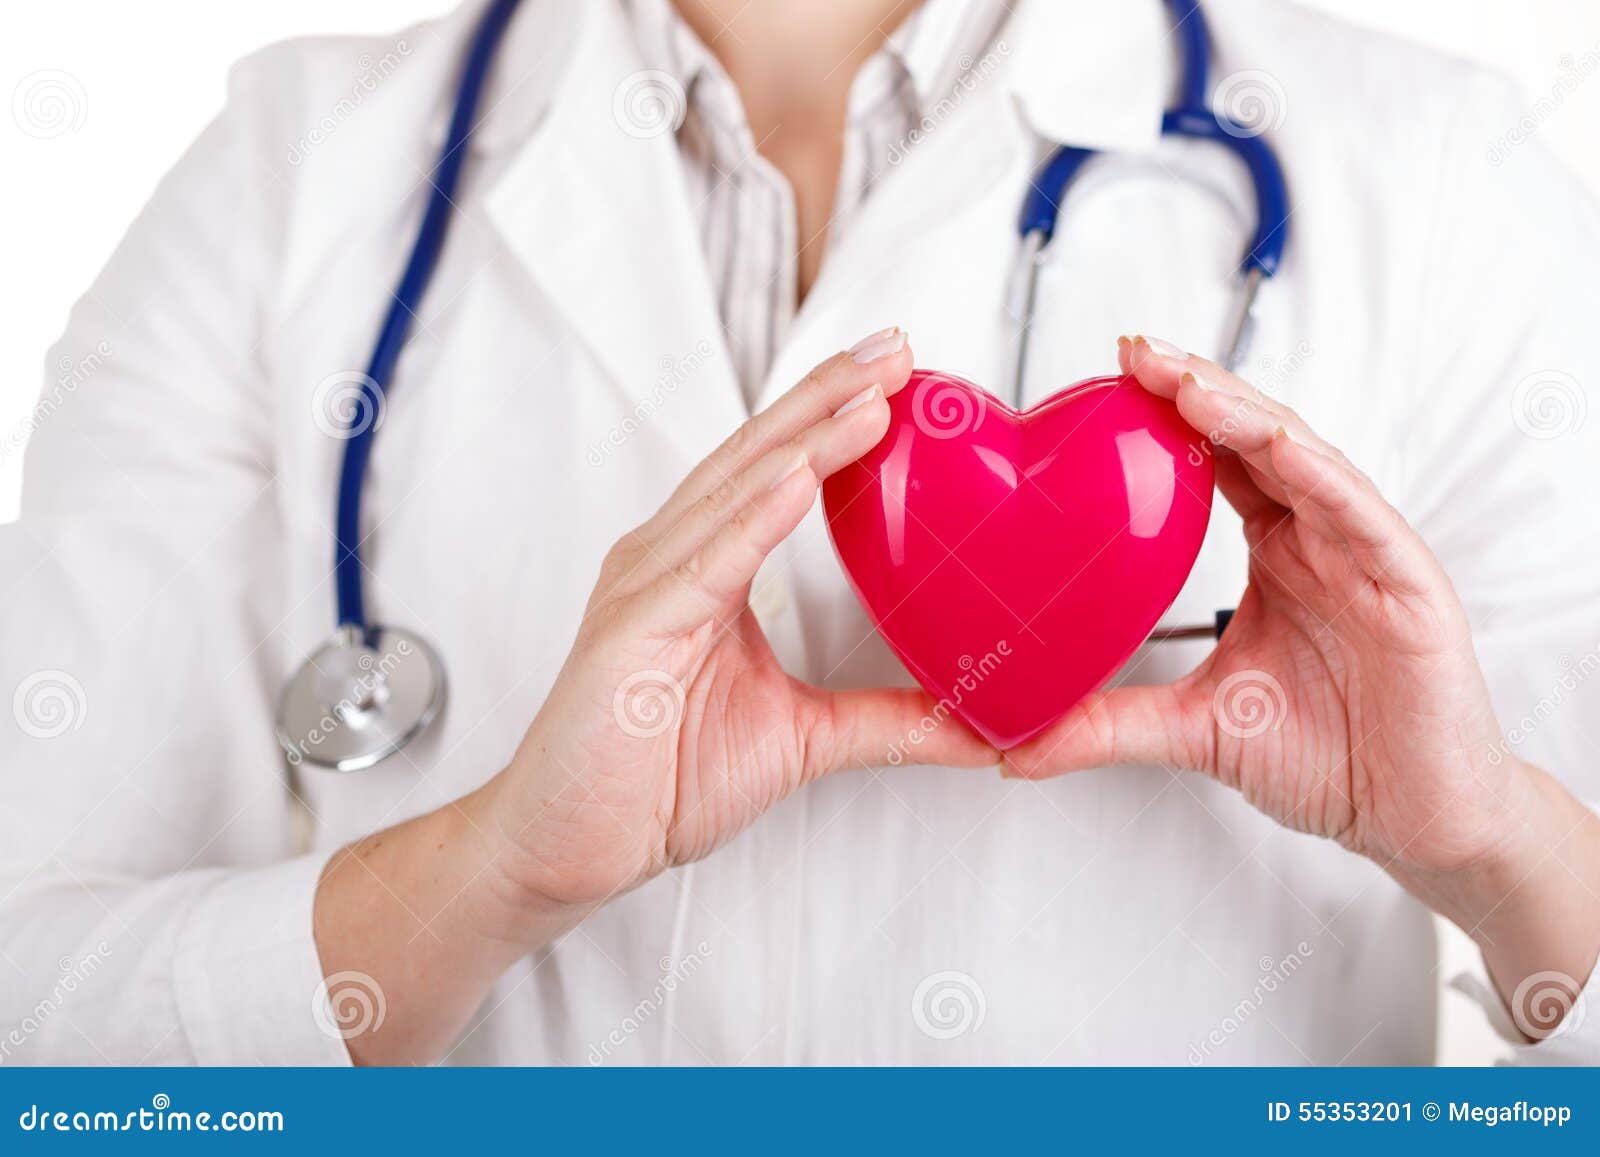 cardiology care,health, protection and prevention.